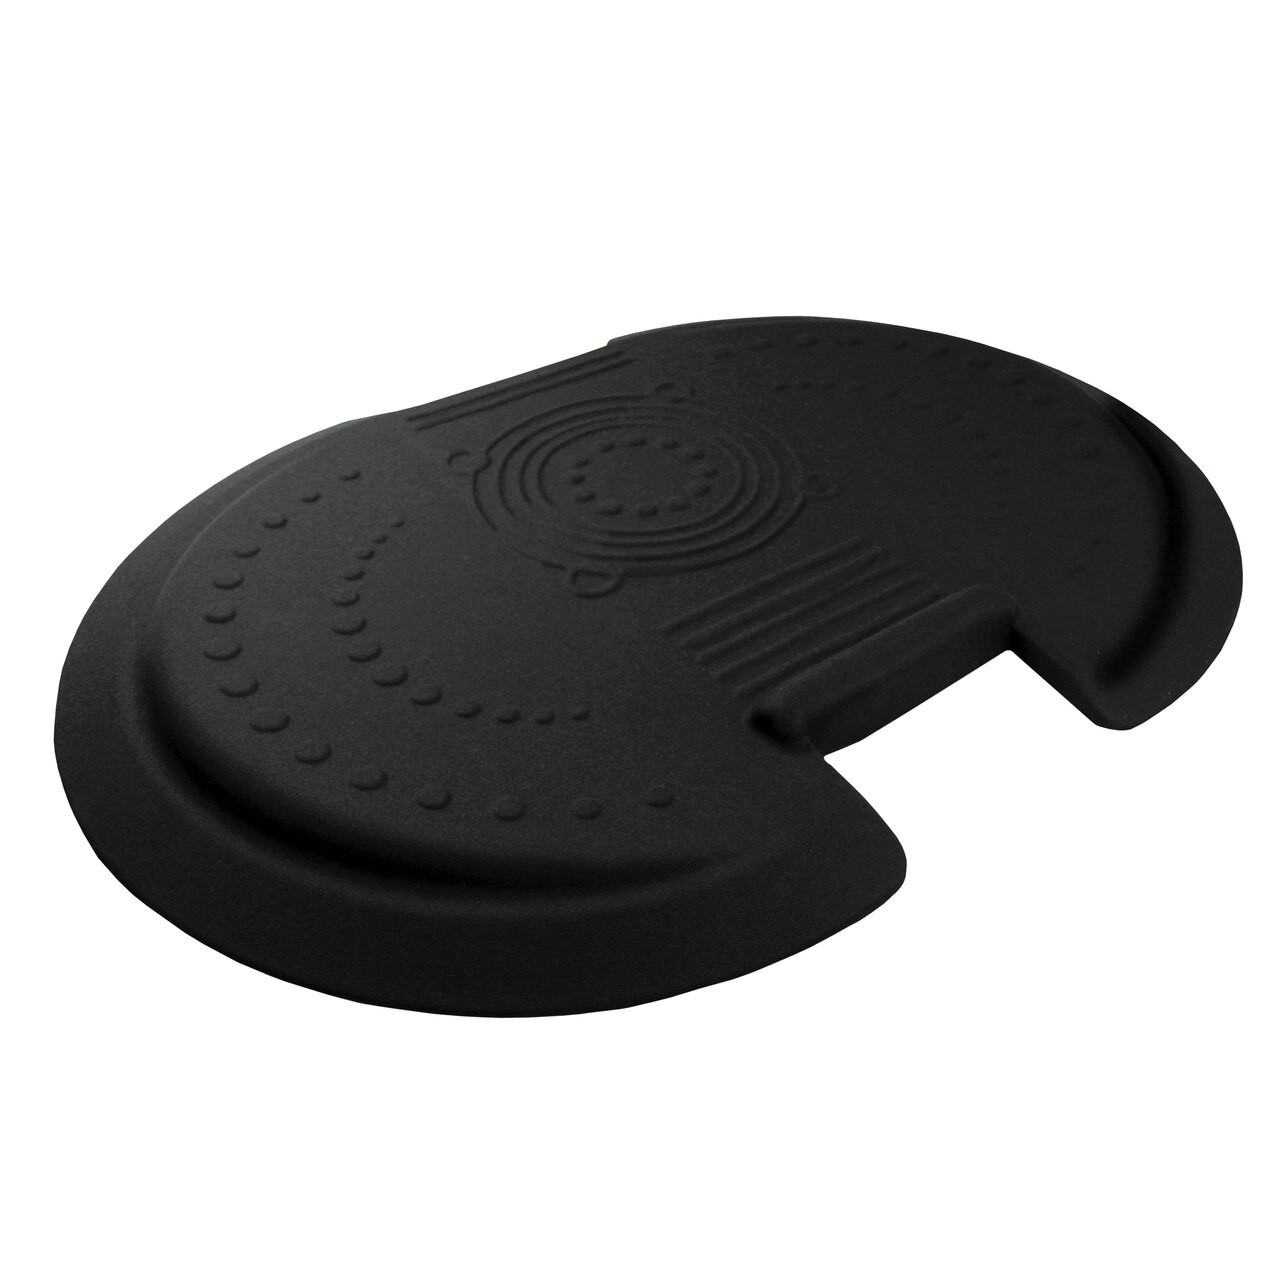 https://cdn11.bigcommerce.com/s-fjwps1jbkv/images/stencil/1280x1280/products/270/3683/afs-tex-system-5000-anti-fatigue-mat-ergonomically-designed-for-use-with-standing-desks-or-midnight-black-or-size-26-x-36__62563.1688994034.jpg?c=2?imbypass=on